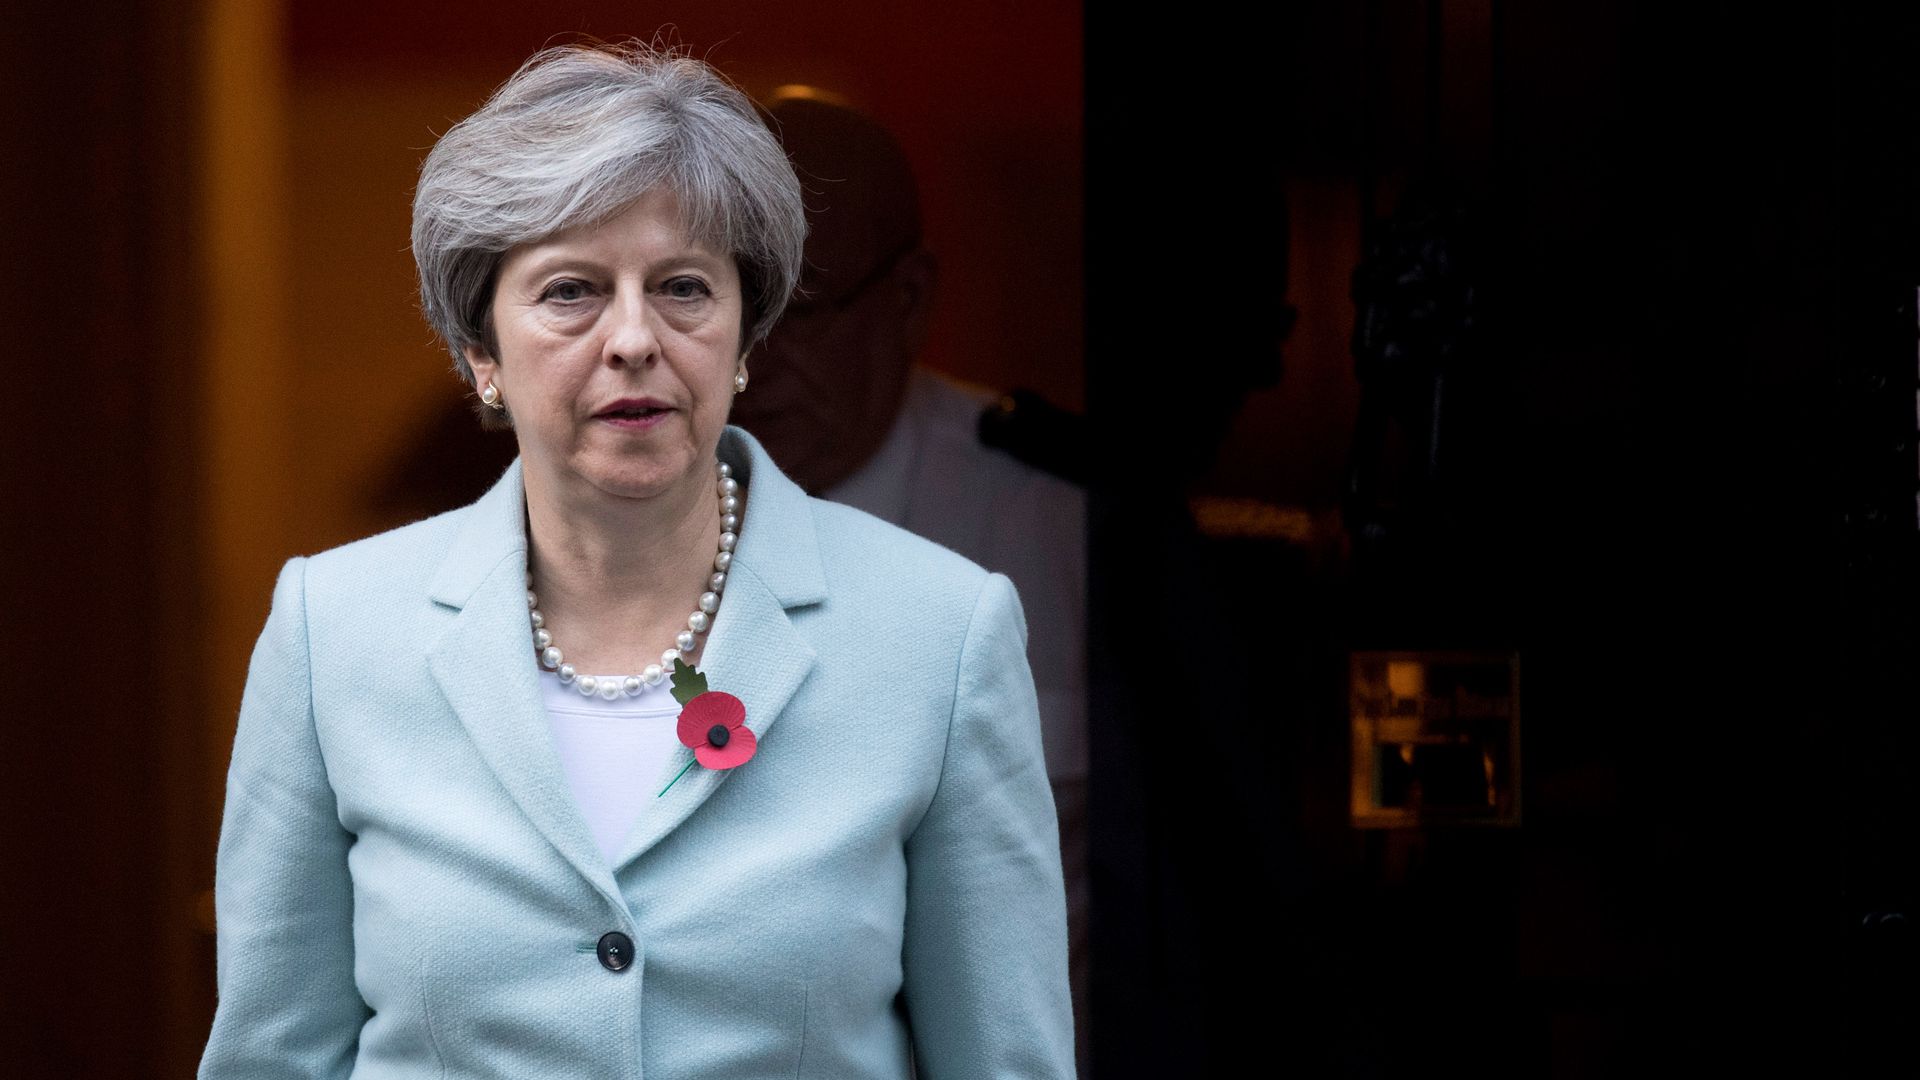 Theresa May Highly Likely Russia Responsible For Attack On Ex